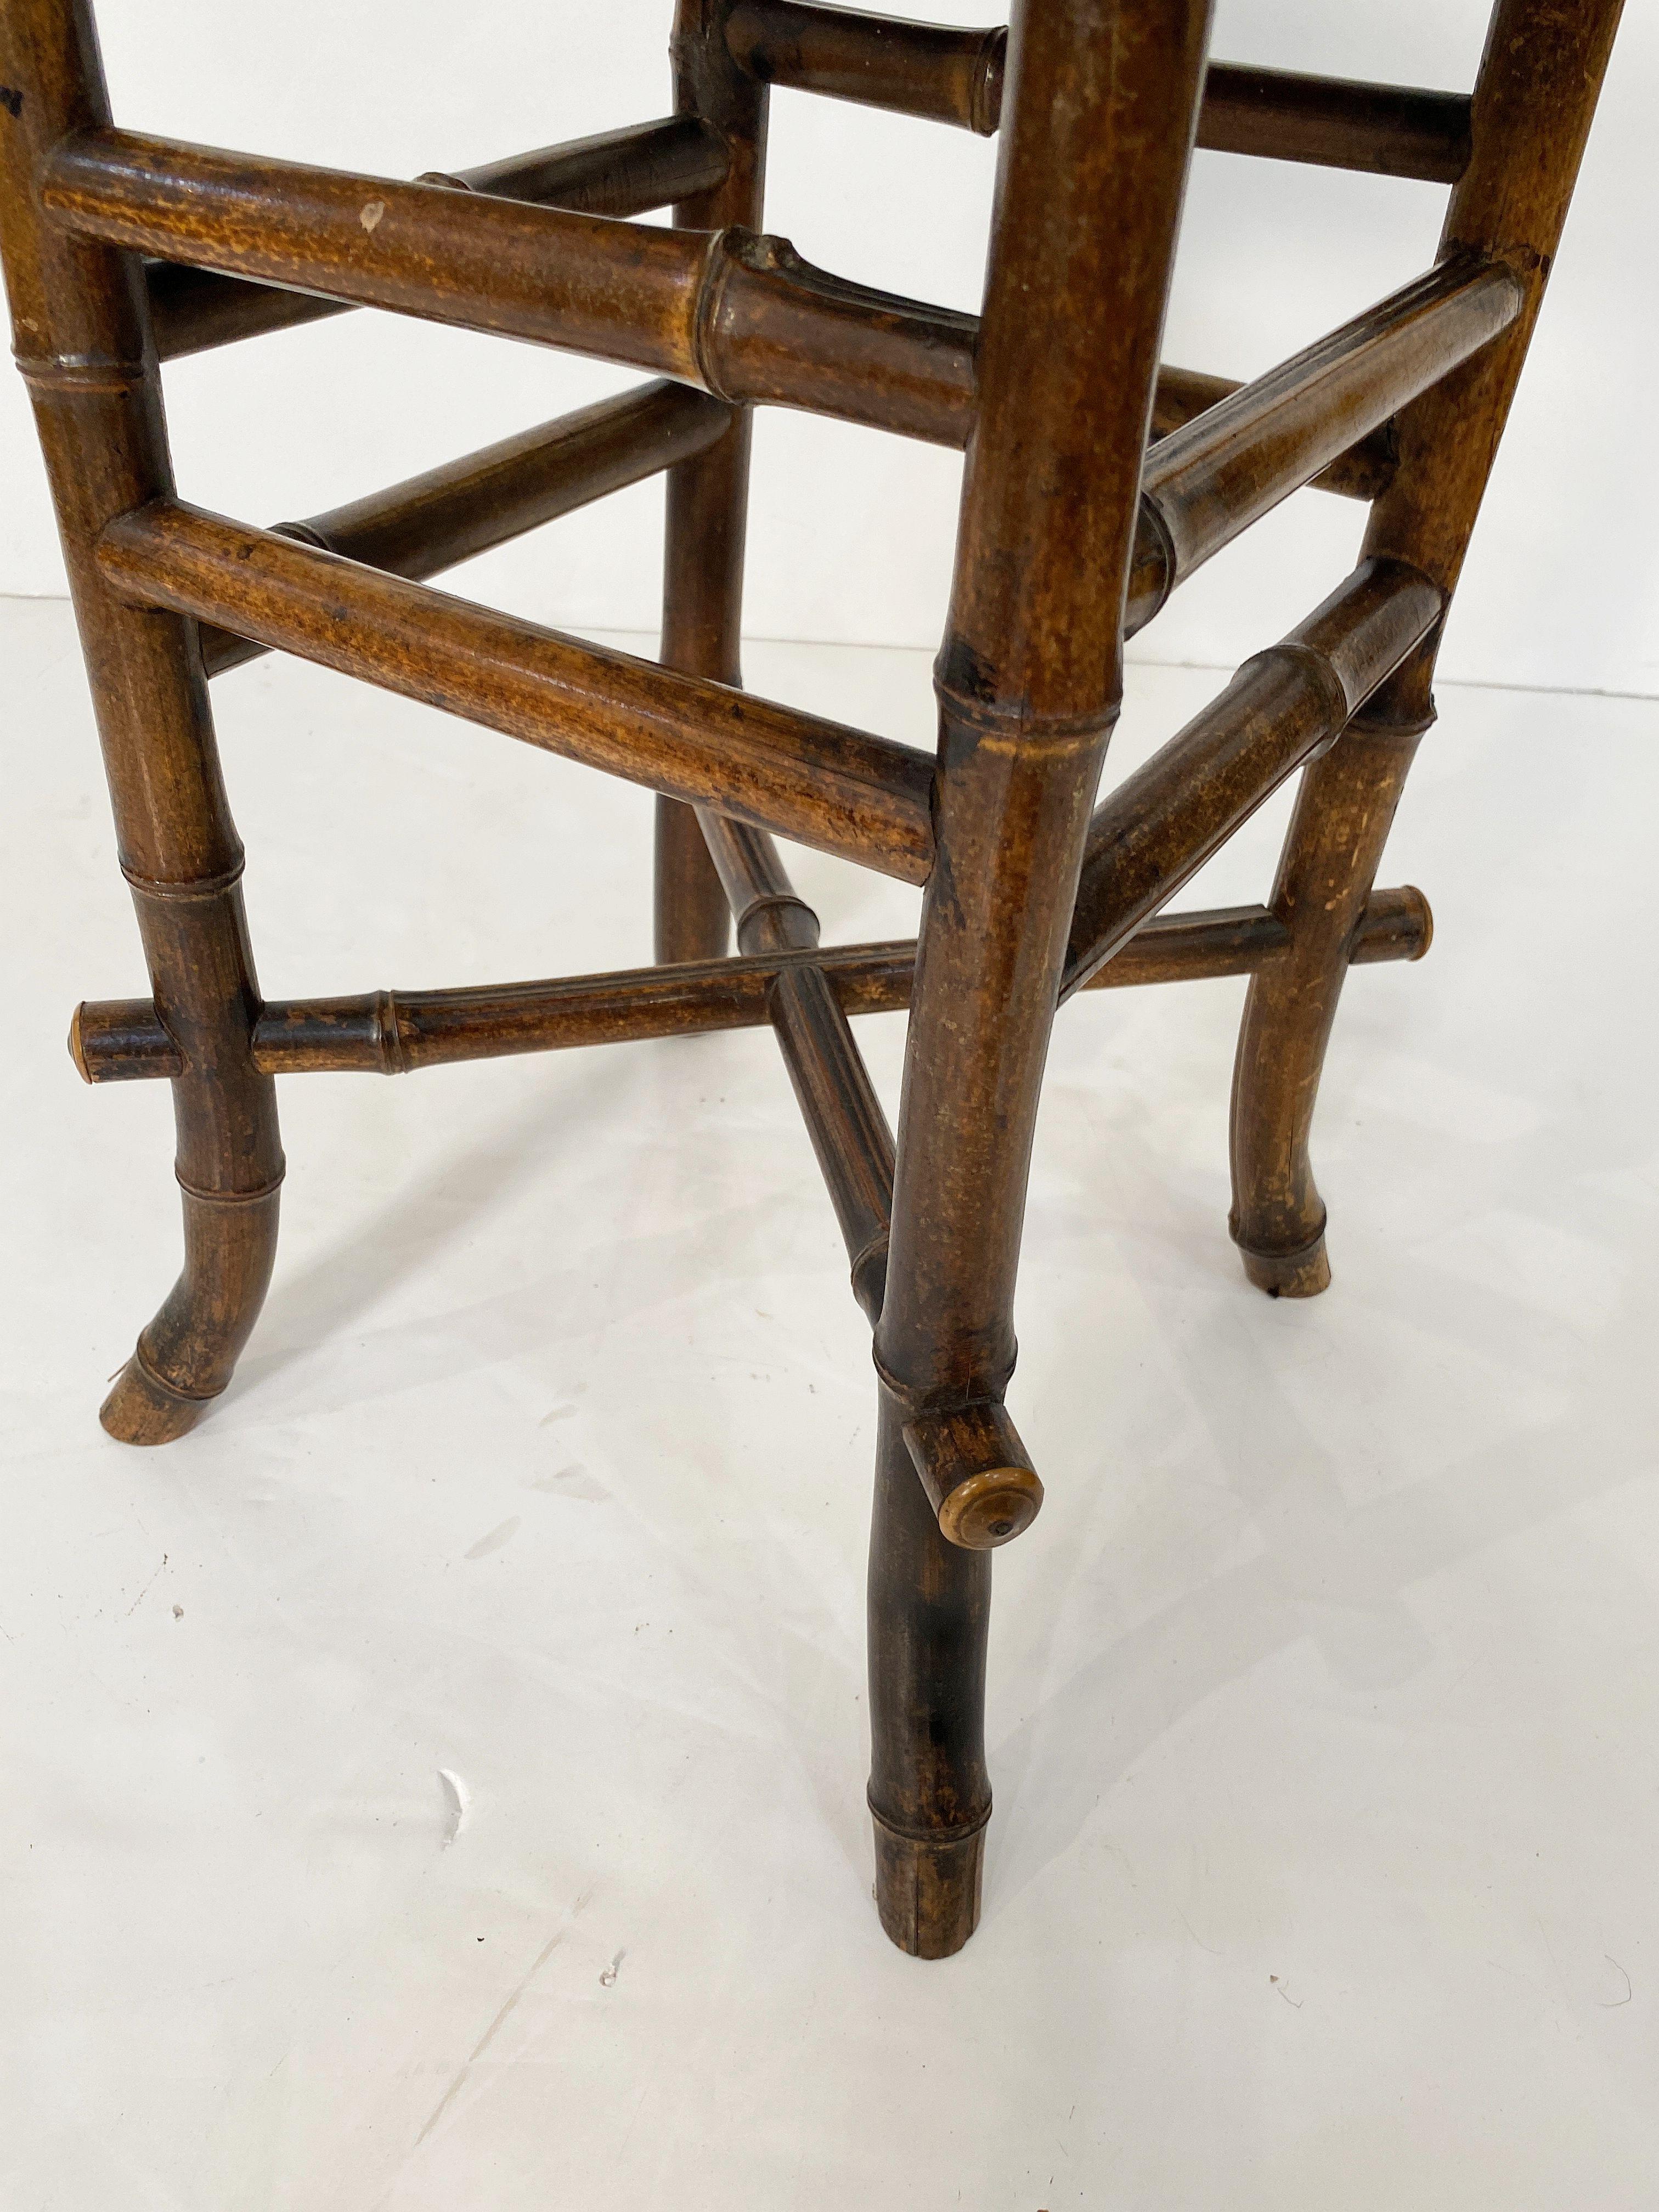 English Bamboo Table or Stool with Tile Seat from the Aesthetic Movement Era For Sale 7